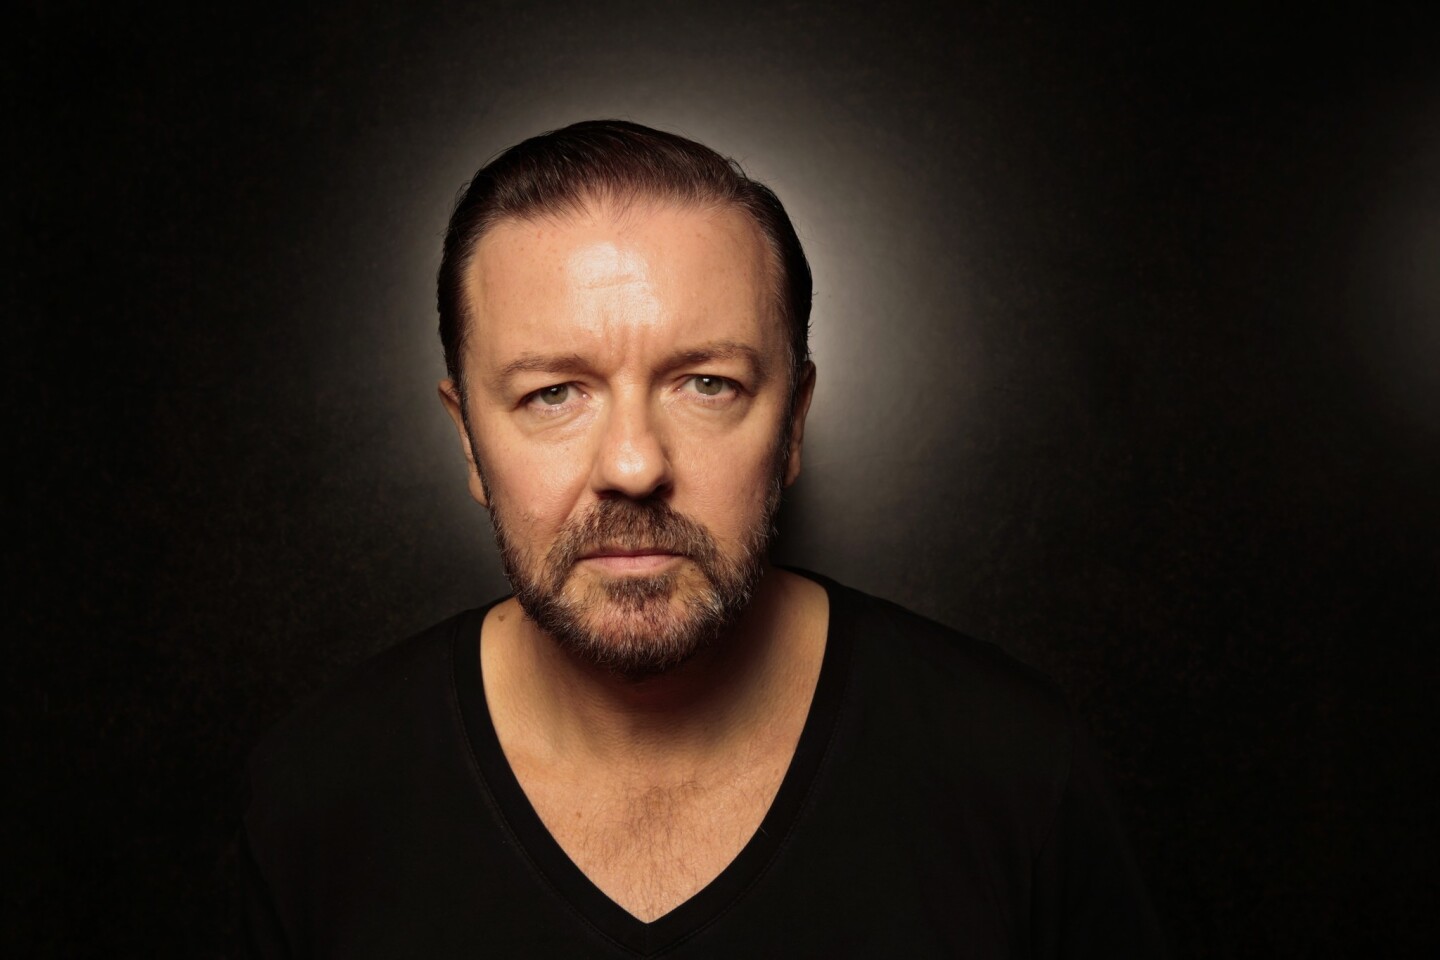 In probably the biggest surprise of the Emmy nominations, Ricky Gervais was recognized for his role as a slow-witted nursing home employee in the Netflix comedy "Derek."